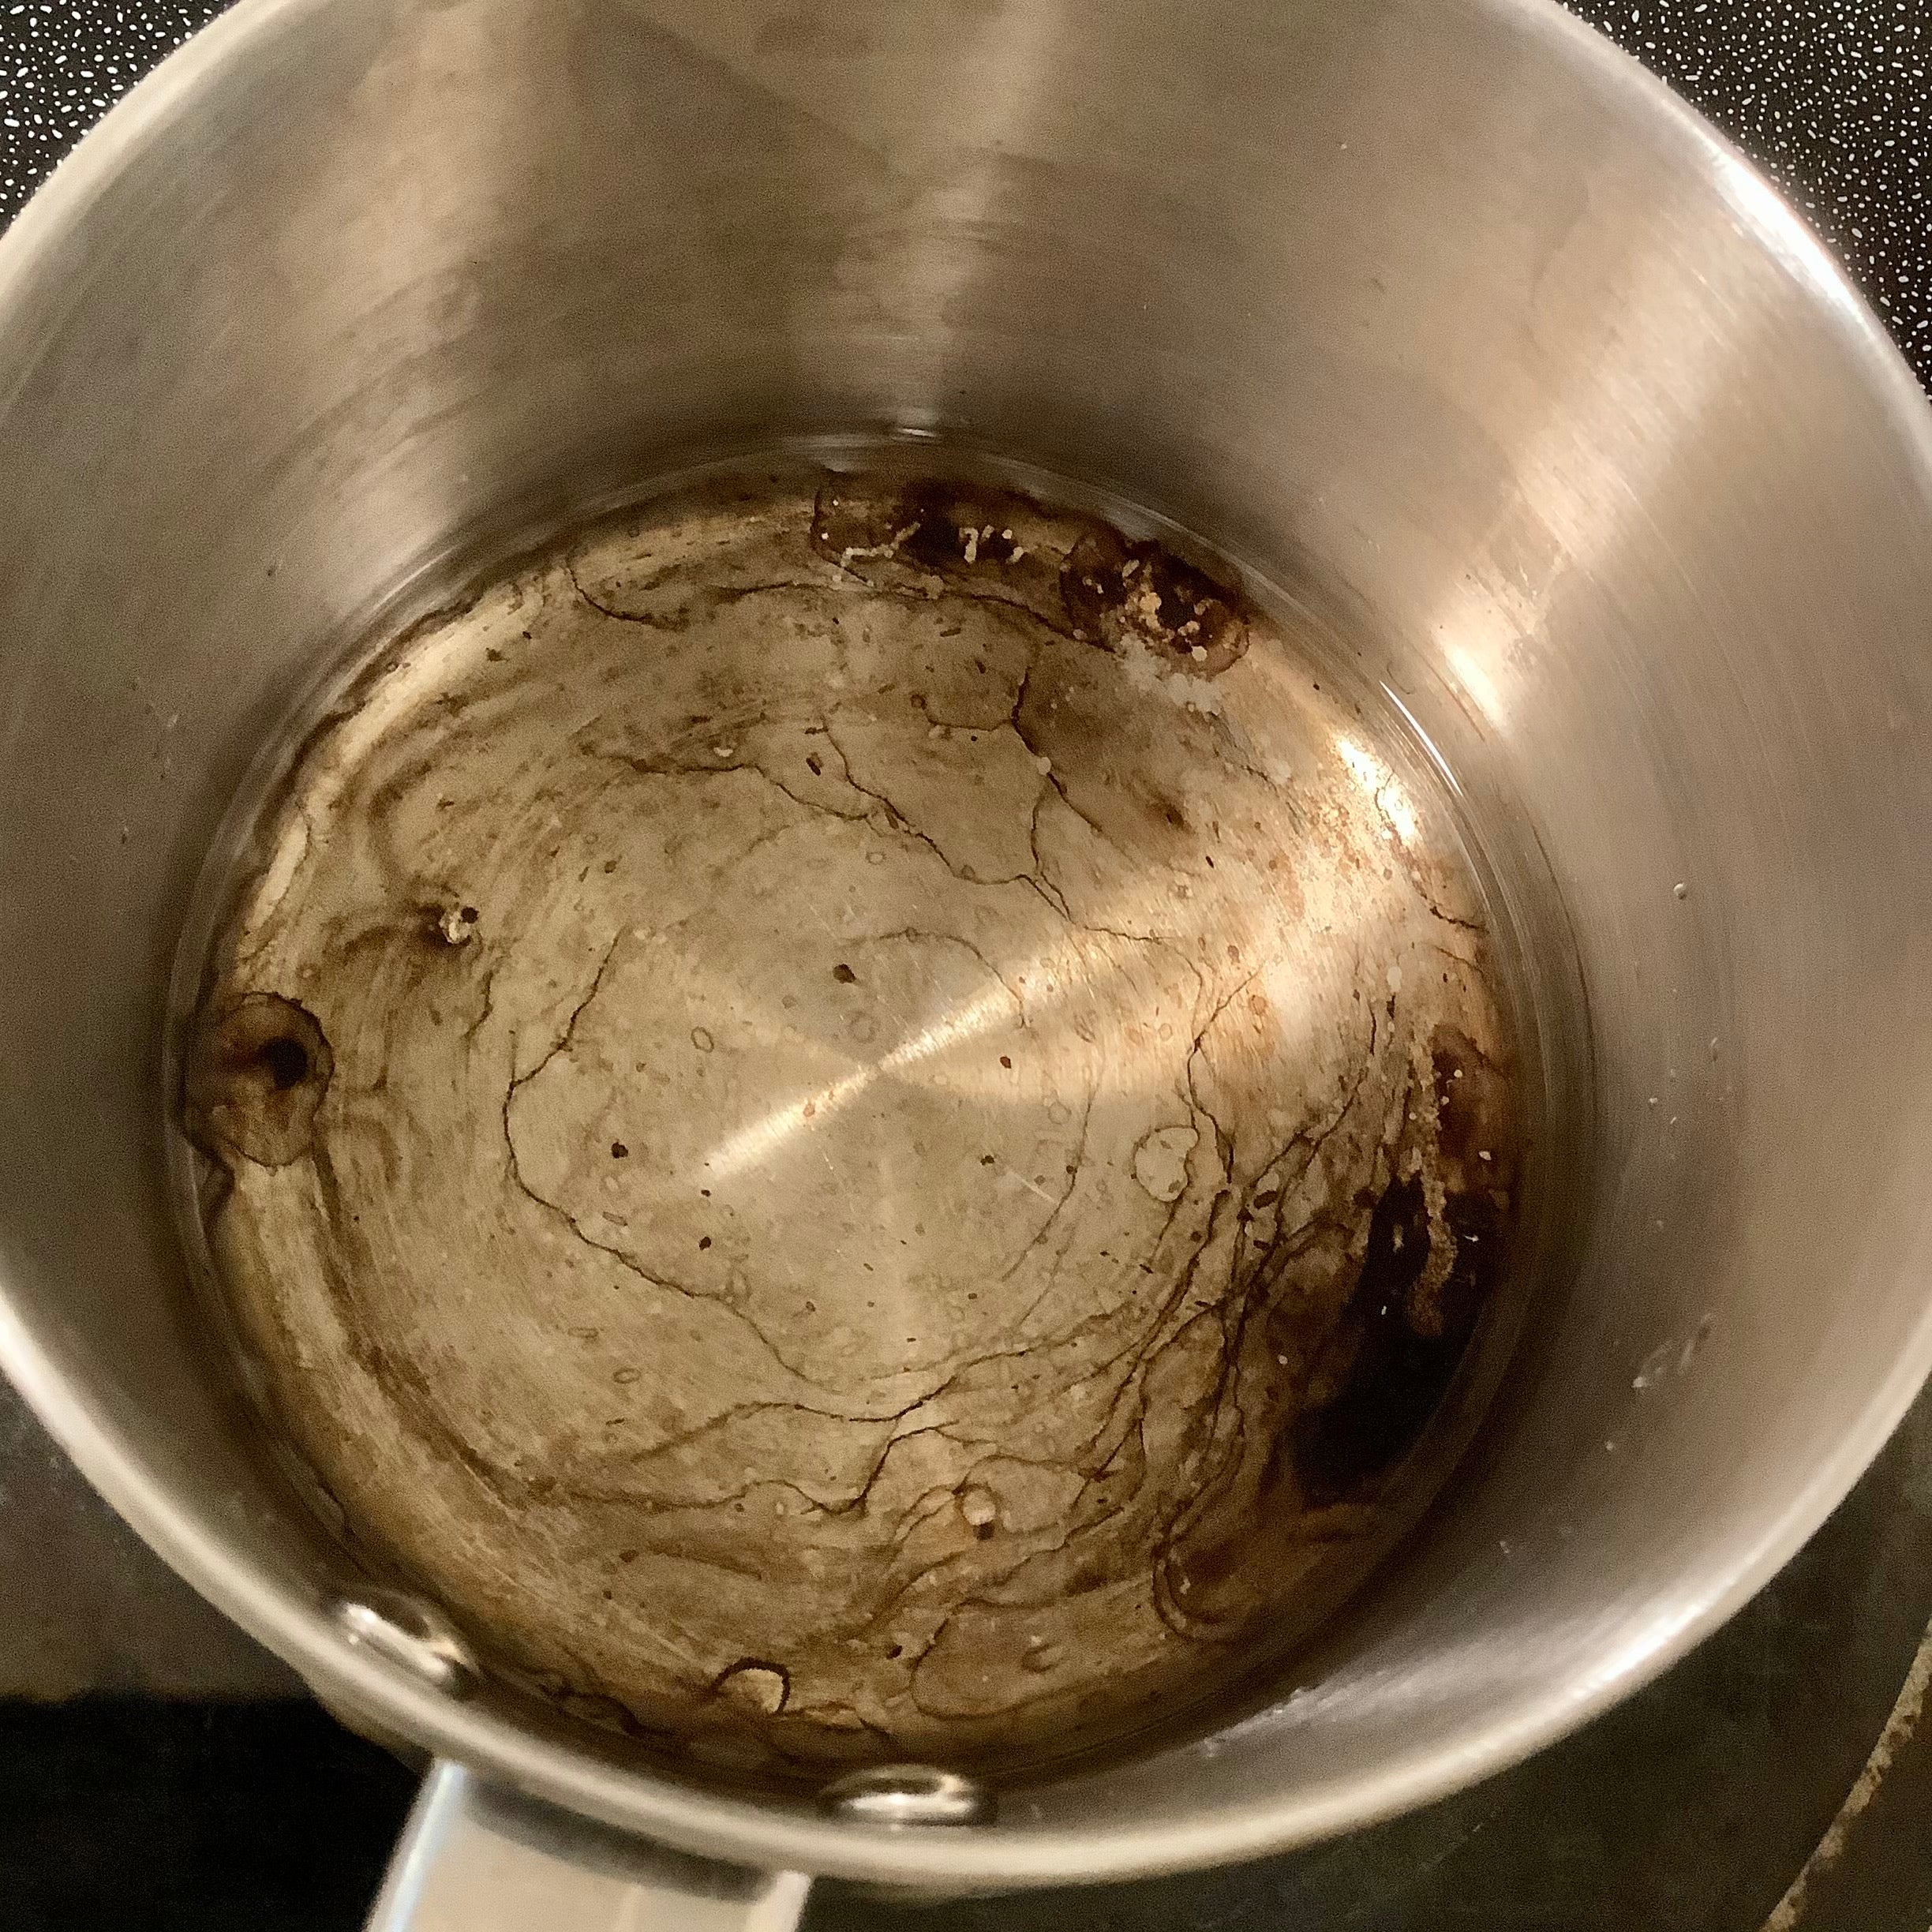 Stainless Steel Cooking Pot With Burnt Scorched Damage Before Cleaning